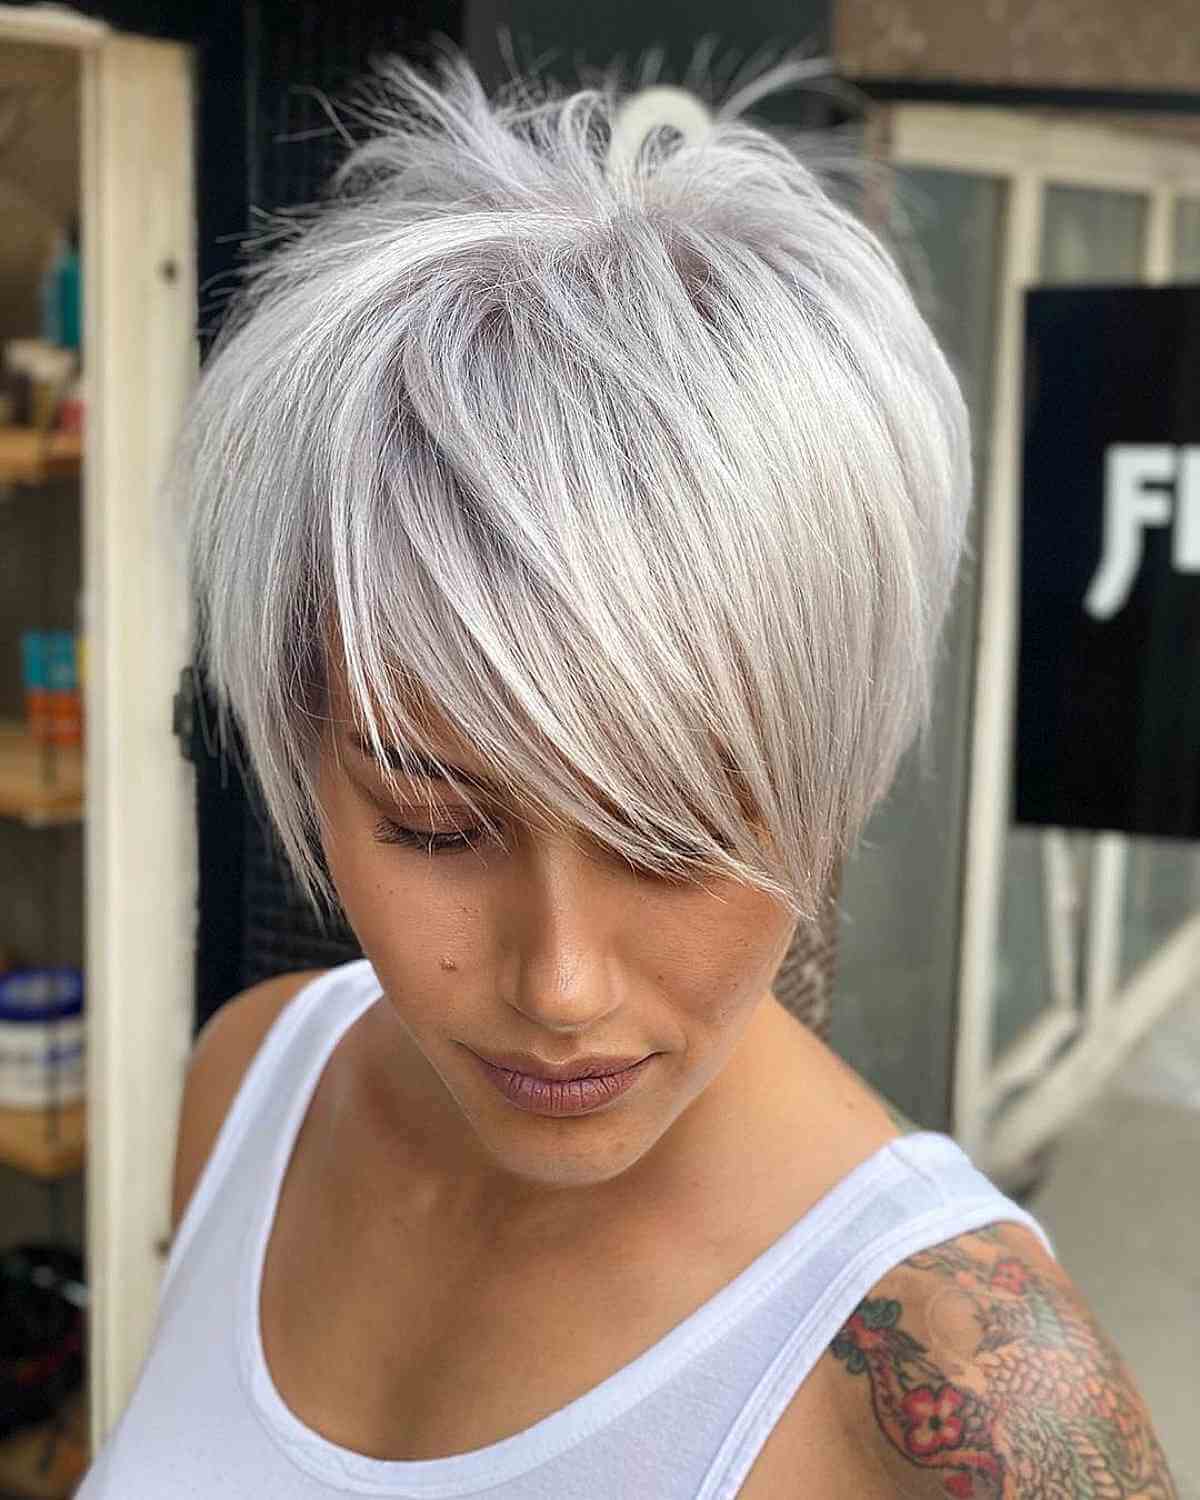 Pixie Cut With Platinum Blonde Hair for a Heart Face